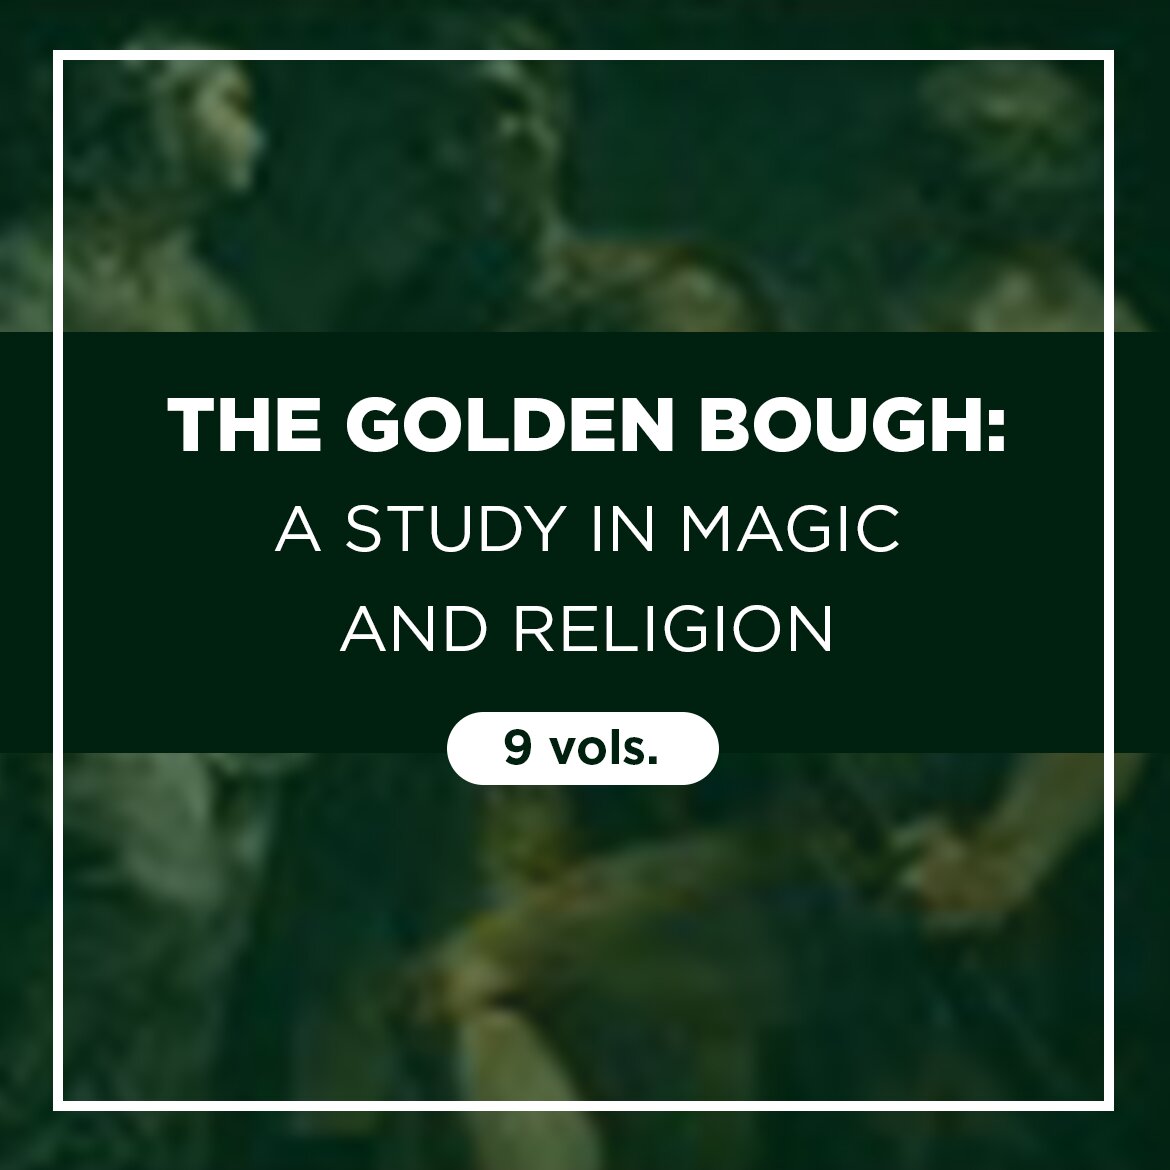 The Golden Bough: A Study in Magic and Religion (9 vols.)